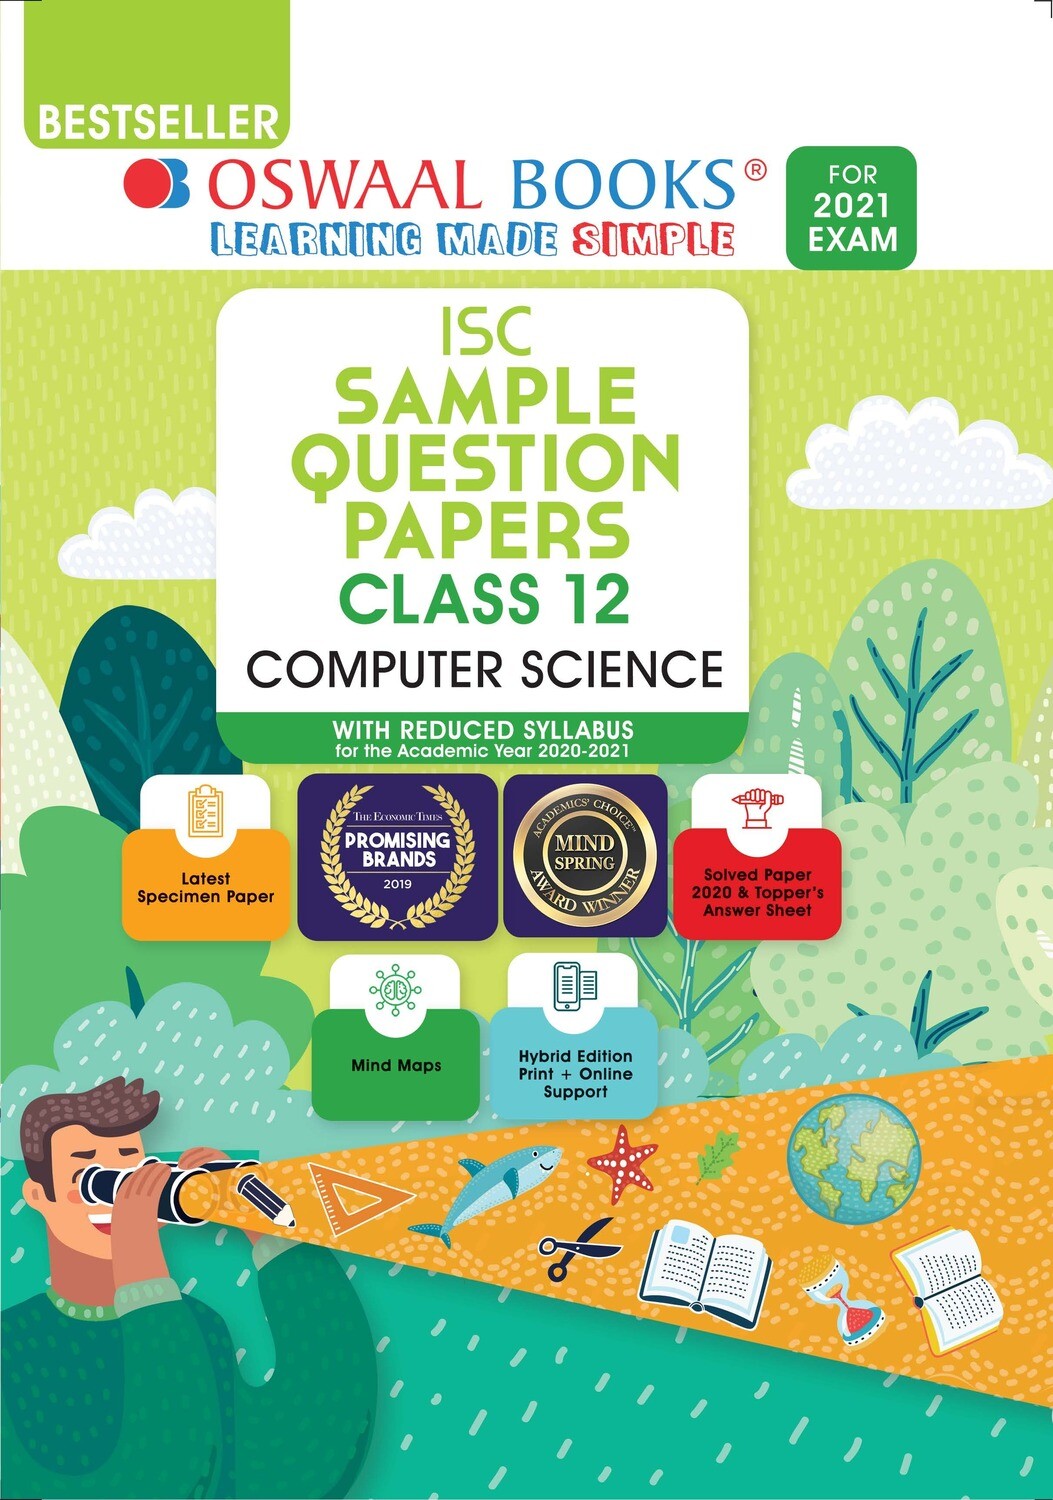 Buy e-book: Oswaal ISC Sample Question Papers Class 12 Computer Science (For 2021 Exam)